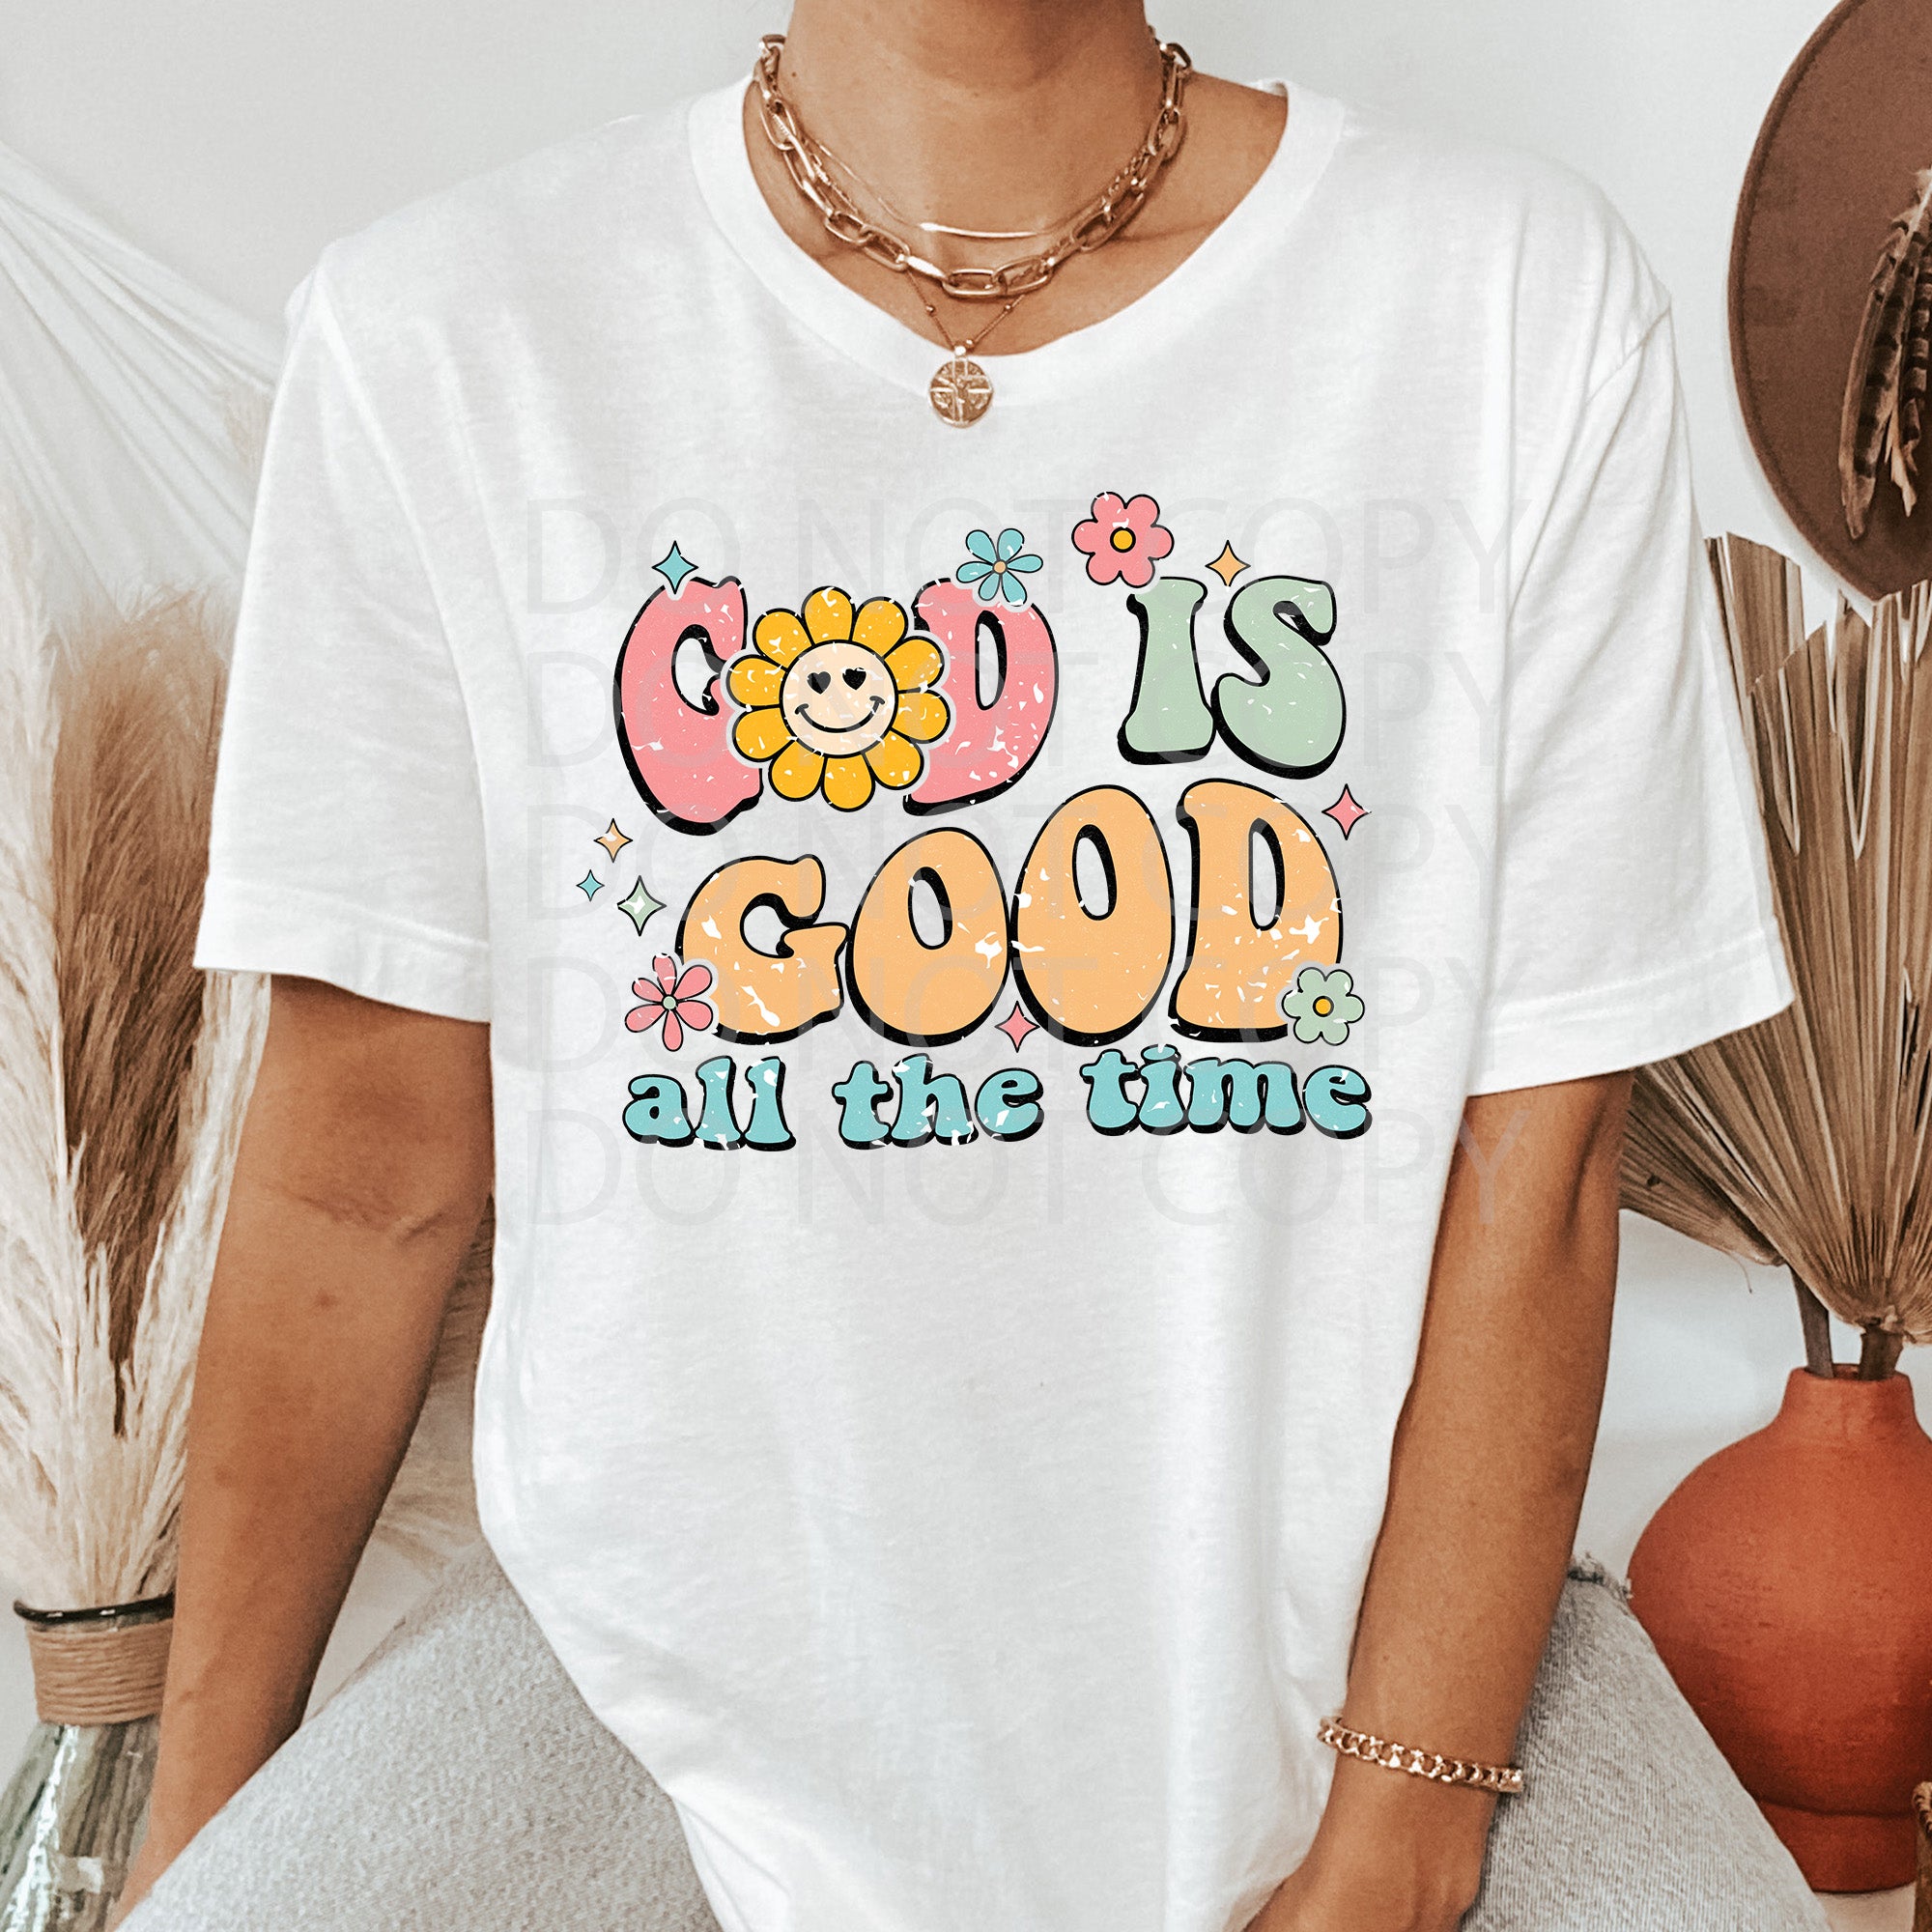 God is Good DTF & Sublimation Transfer – Threaded Transfers